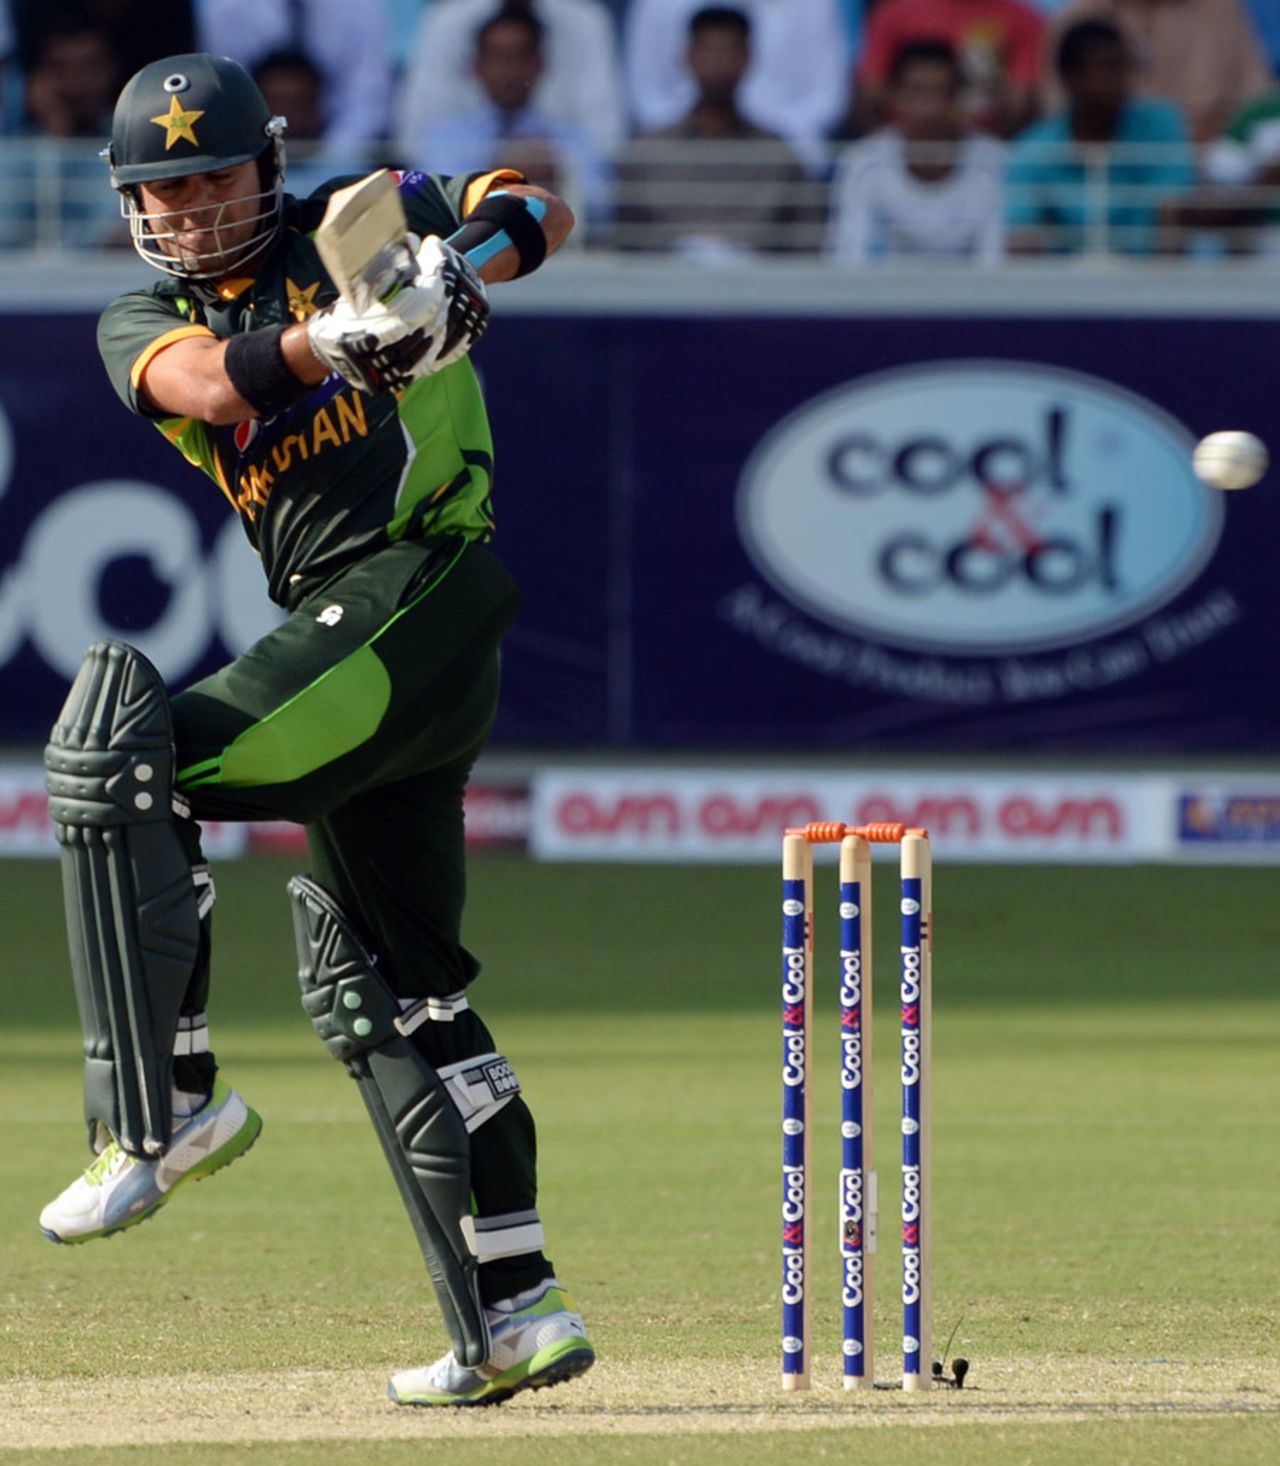 Ahmed Shehzad attempts a pull shot during his innings, Pakistan v South Africa, 2nd ODI, Dubai, November 1, 2013